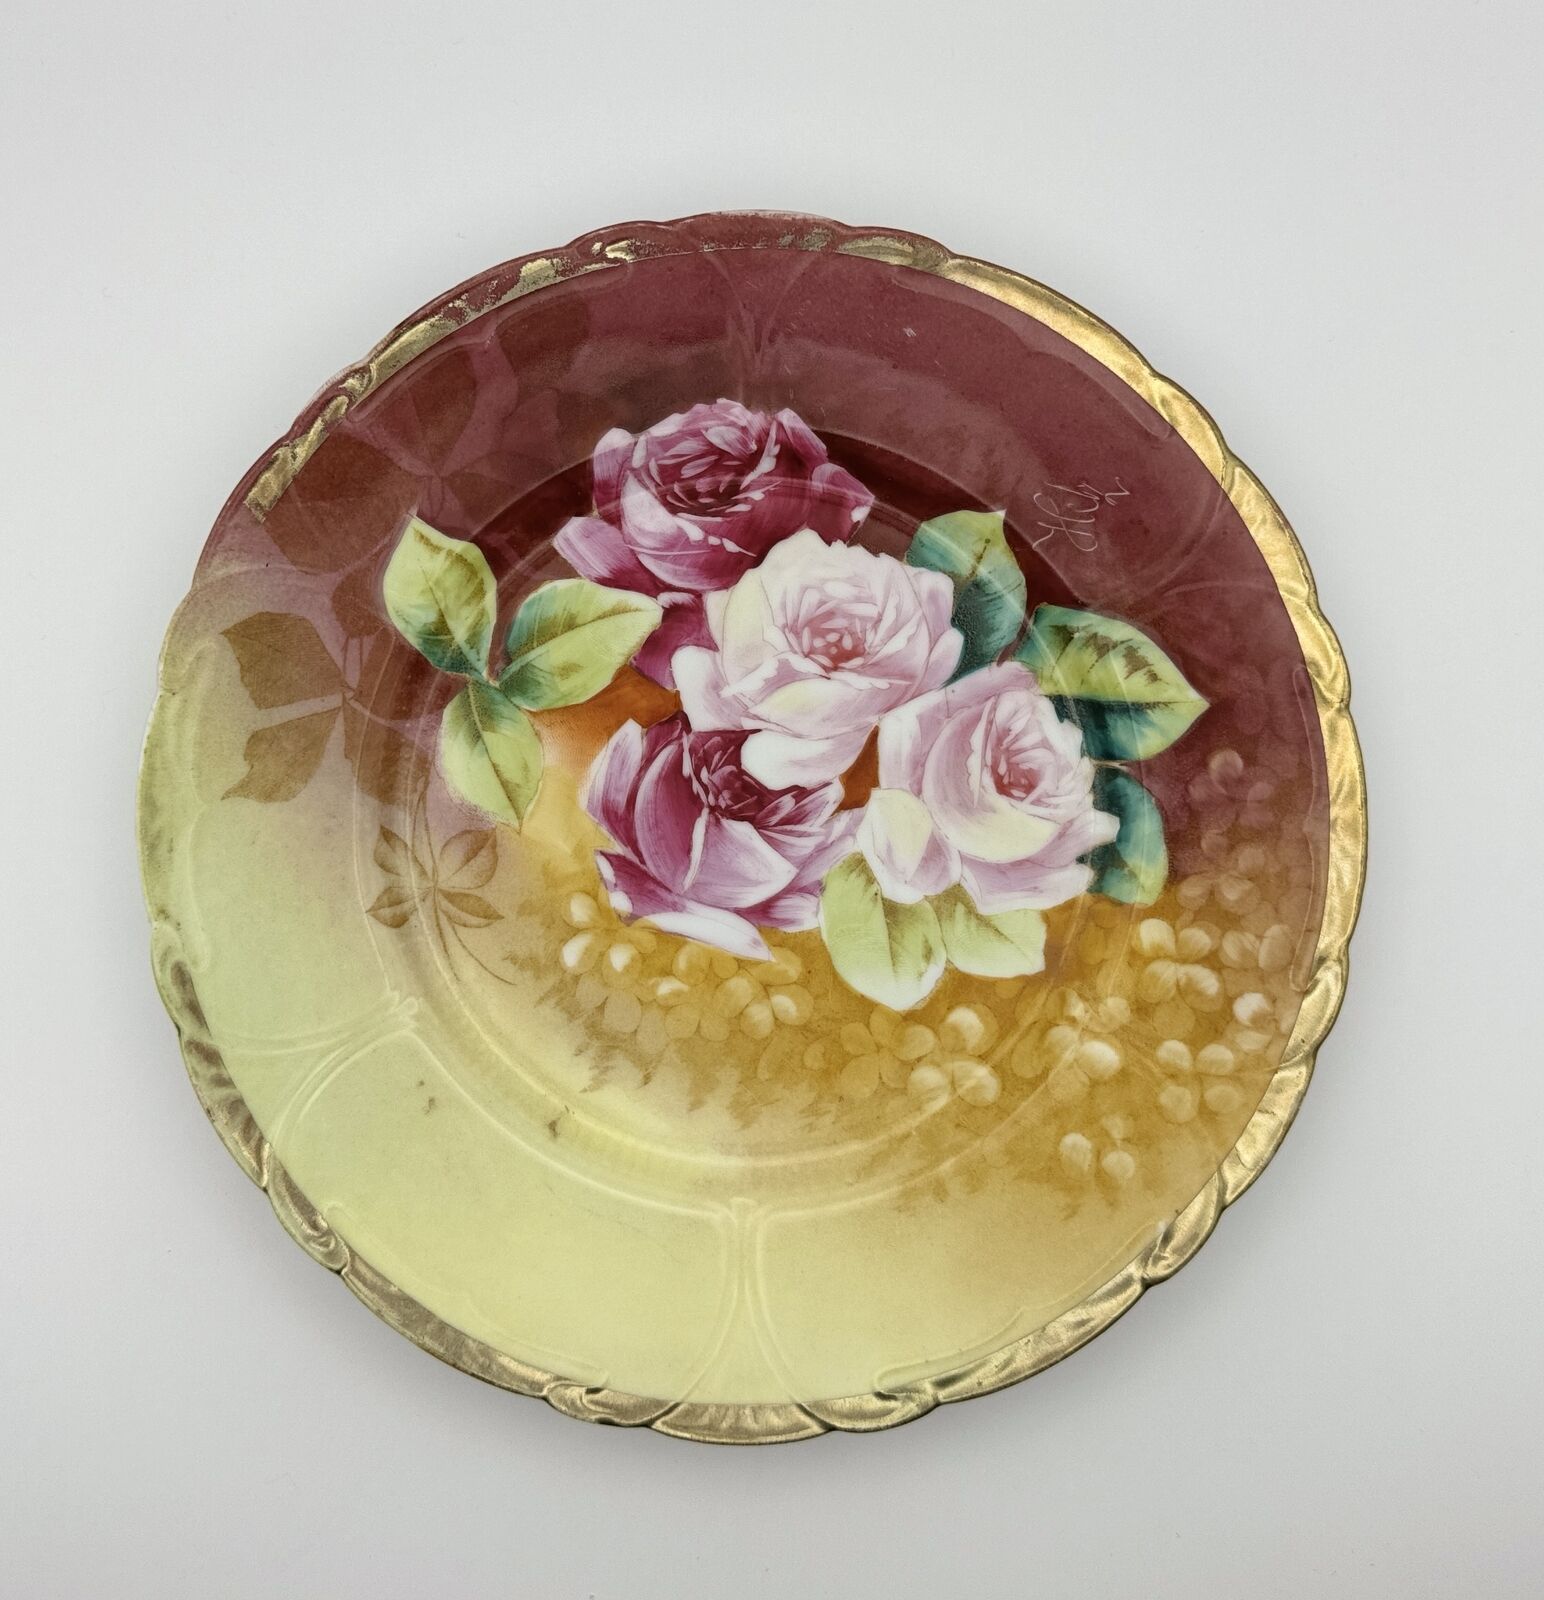 Stunning Hand-Painted German Porcelain Plate with Floral Design